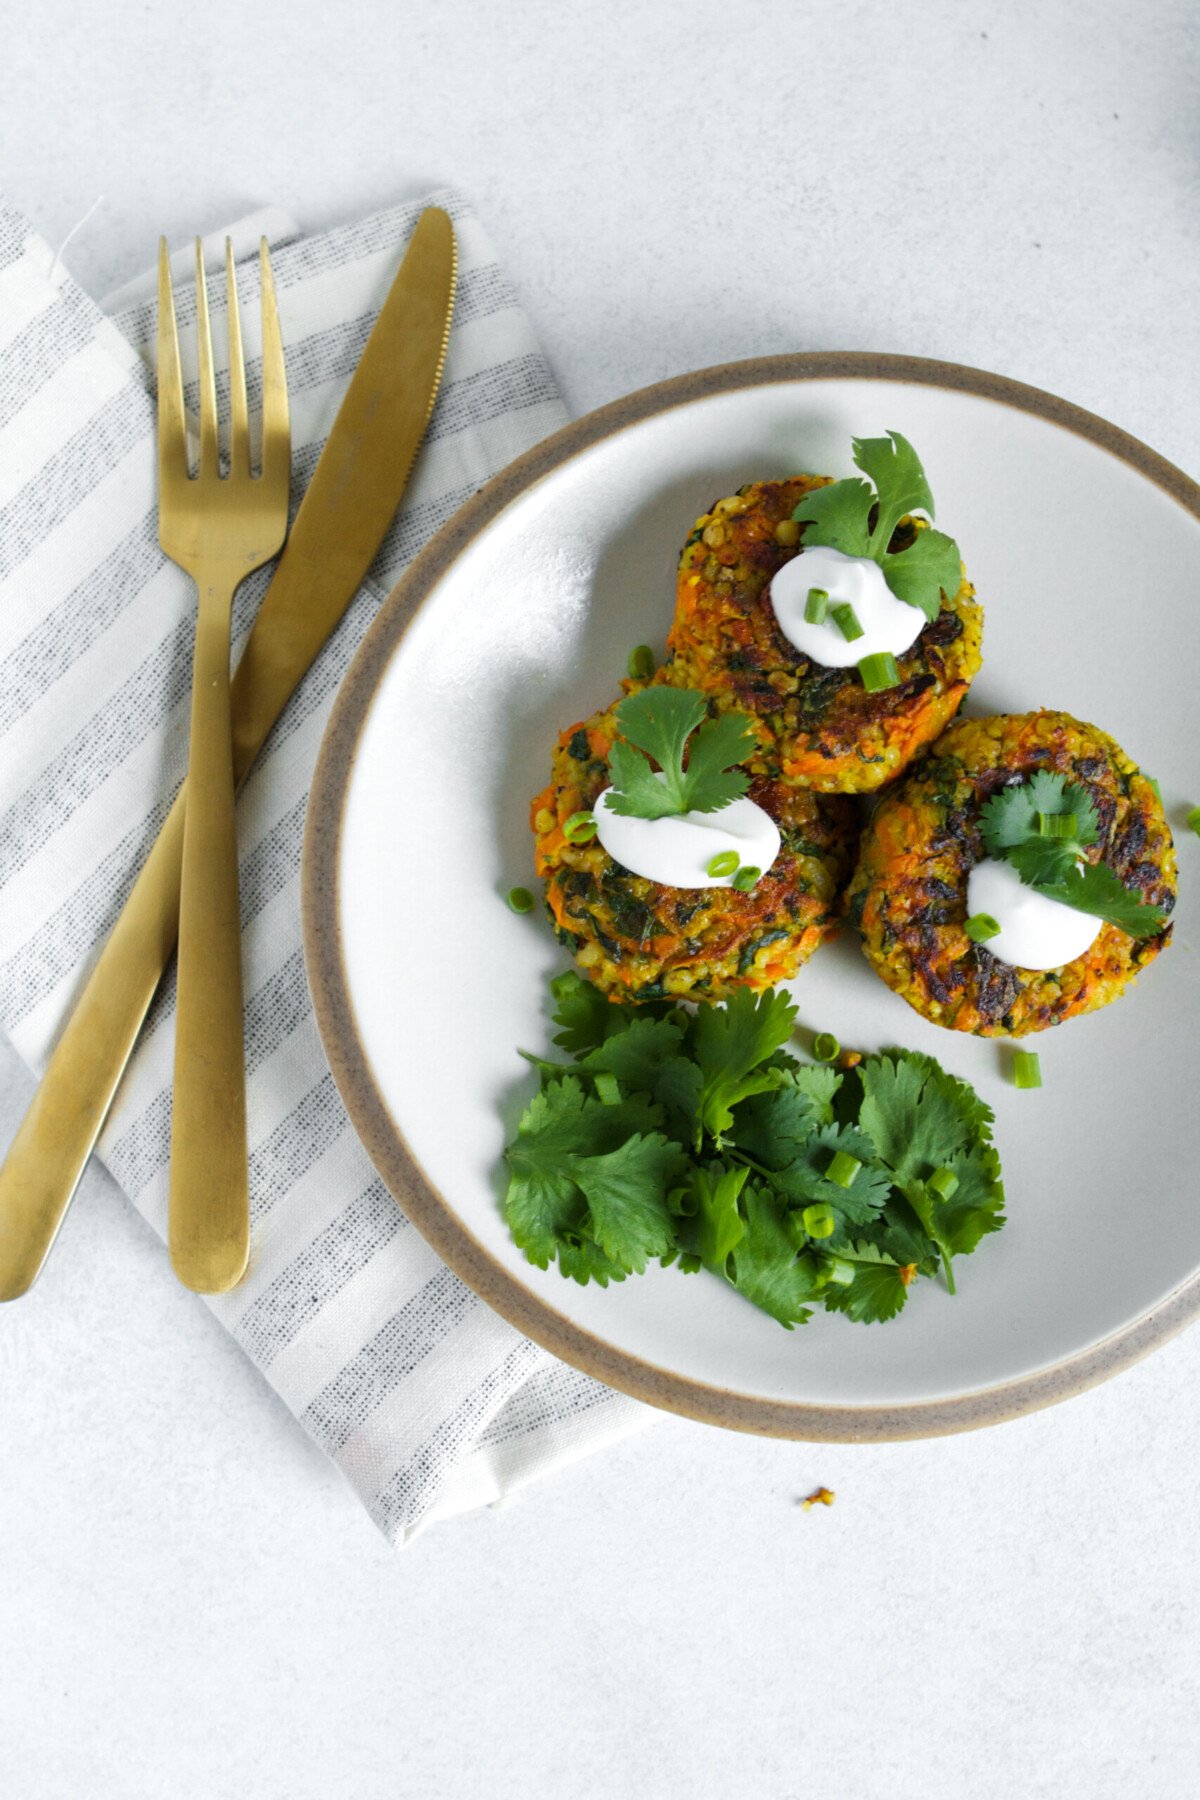 With a simple, yet impressive, ingredient list, these whole-grain sorghum cakes couldn’t be any easier to make. And when you throw carrots, arugula, curry, and a hearty amount of garlic into the mix, they also don’t lack any oomph. These Curried Sorghum Cakes are definitely weeknight-dinner fare. | Zestful Kitchen